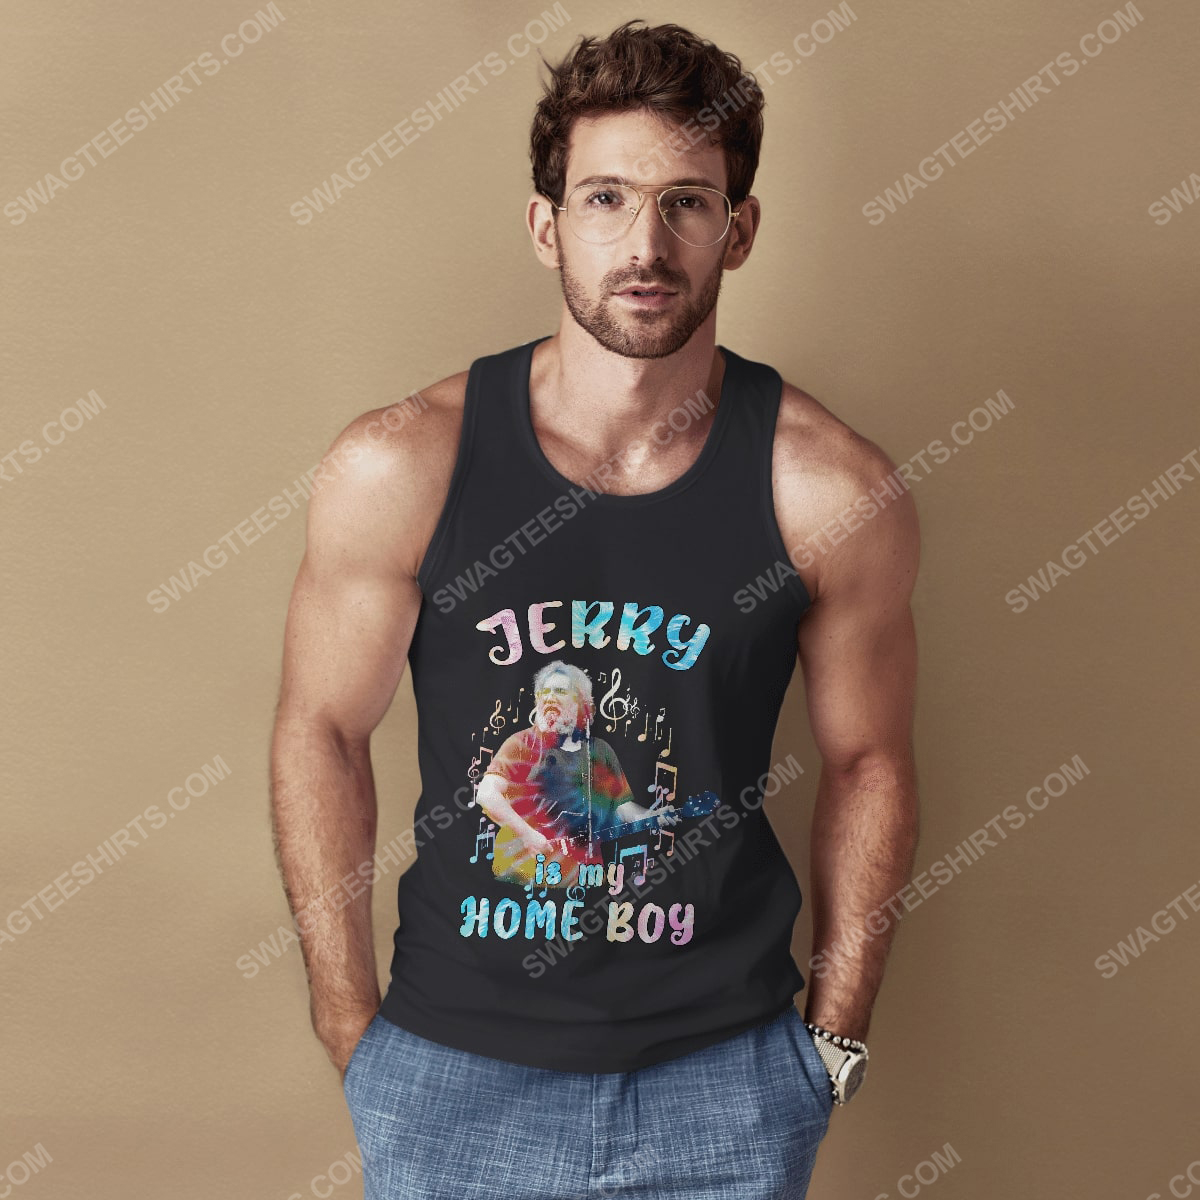 Jerry is my home boy grateful dead rock band tank top 1(1)